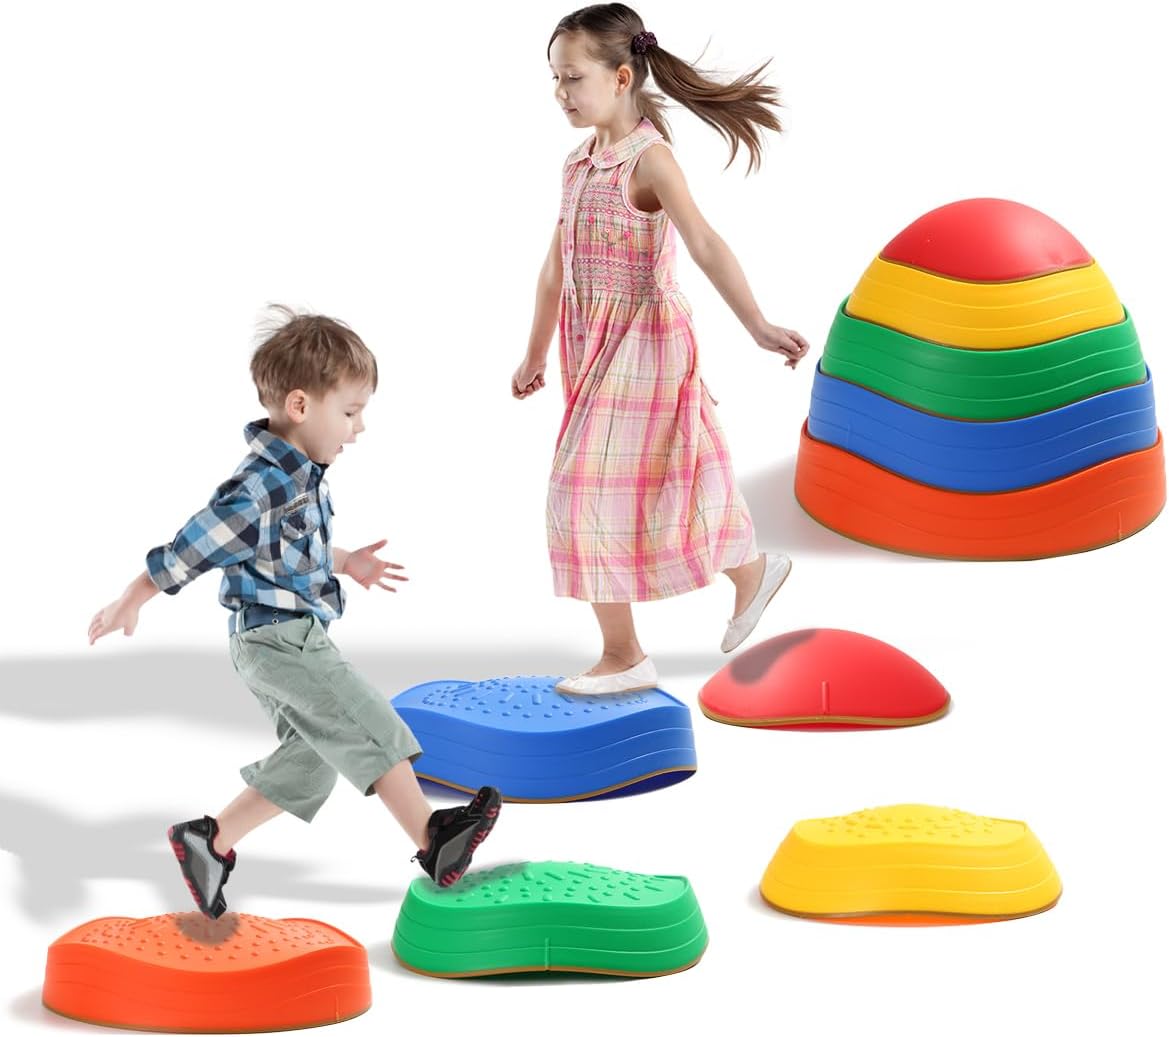 5Pcs Non-Slip Plastic Balance Stepping Stones for kids,up to 220 Ibs for PomotingChildrens Coordination Skills Obstacle Courses Sensory Toys for Toddlers,Indoor or Outdoor Play